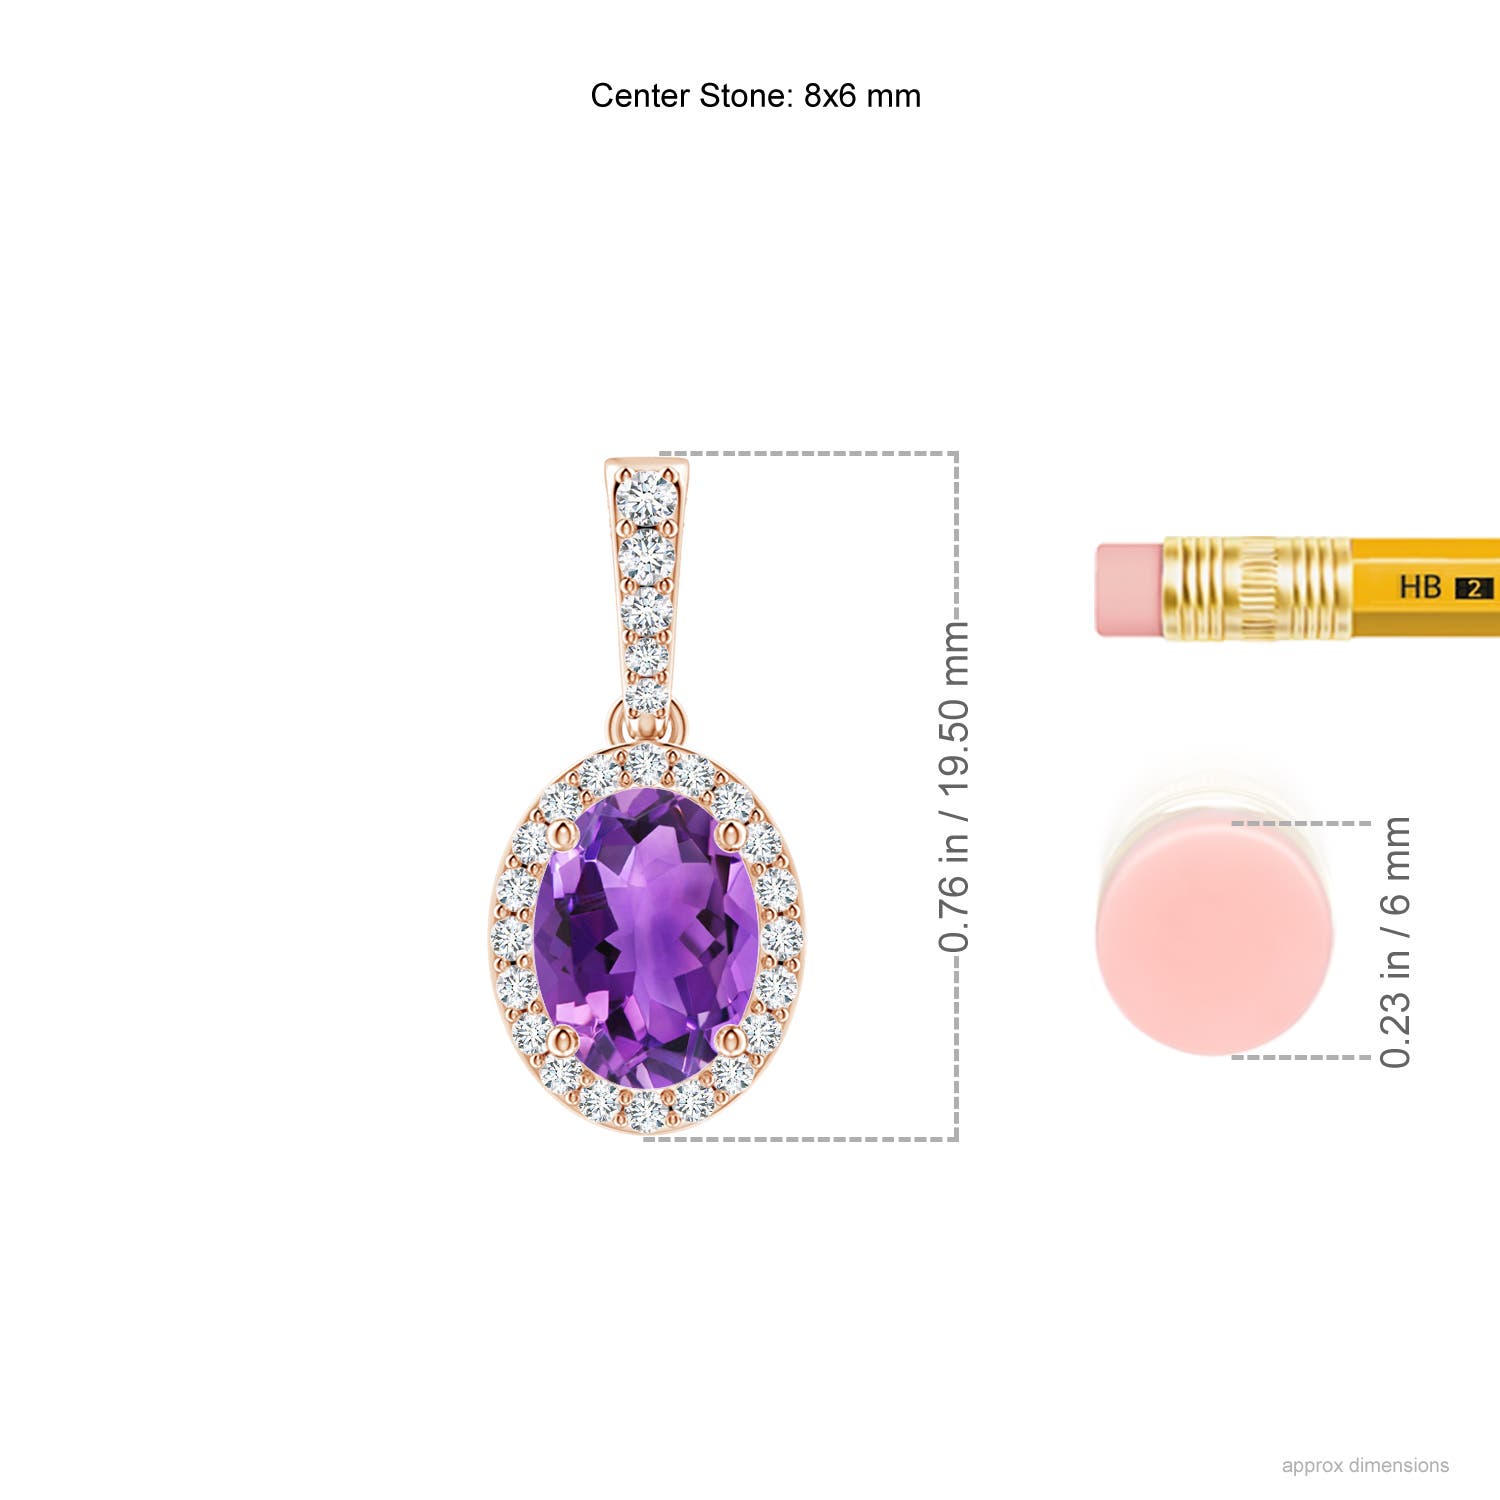 AAA - Amethyst / 1.34 CT / 14 KT Rose Gold